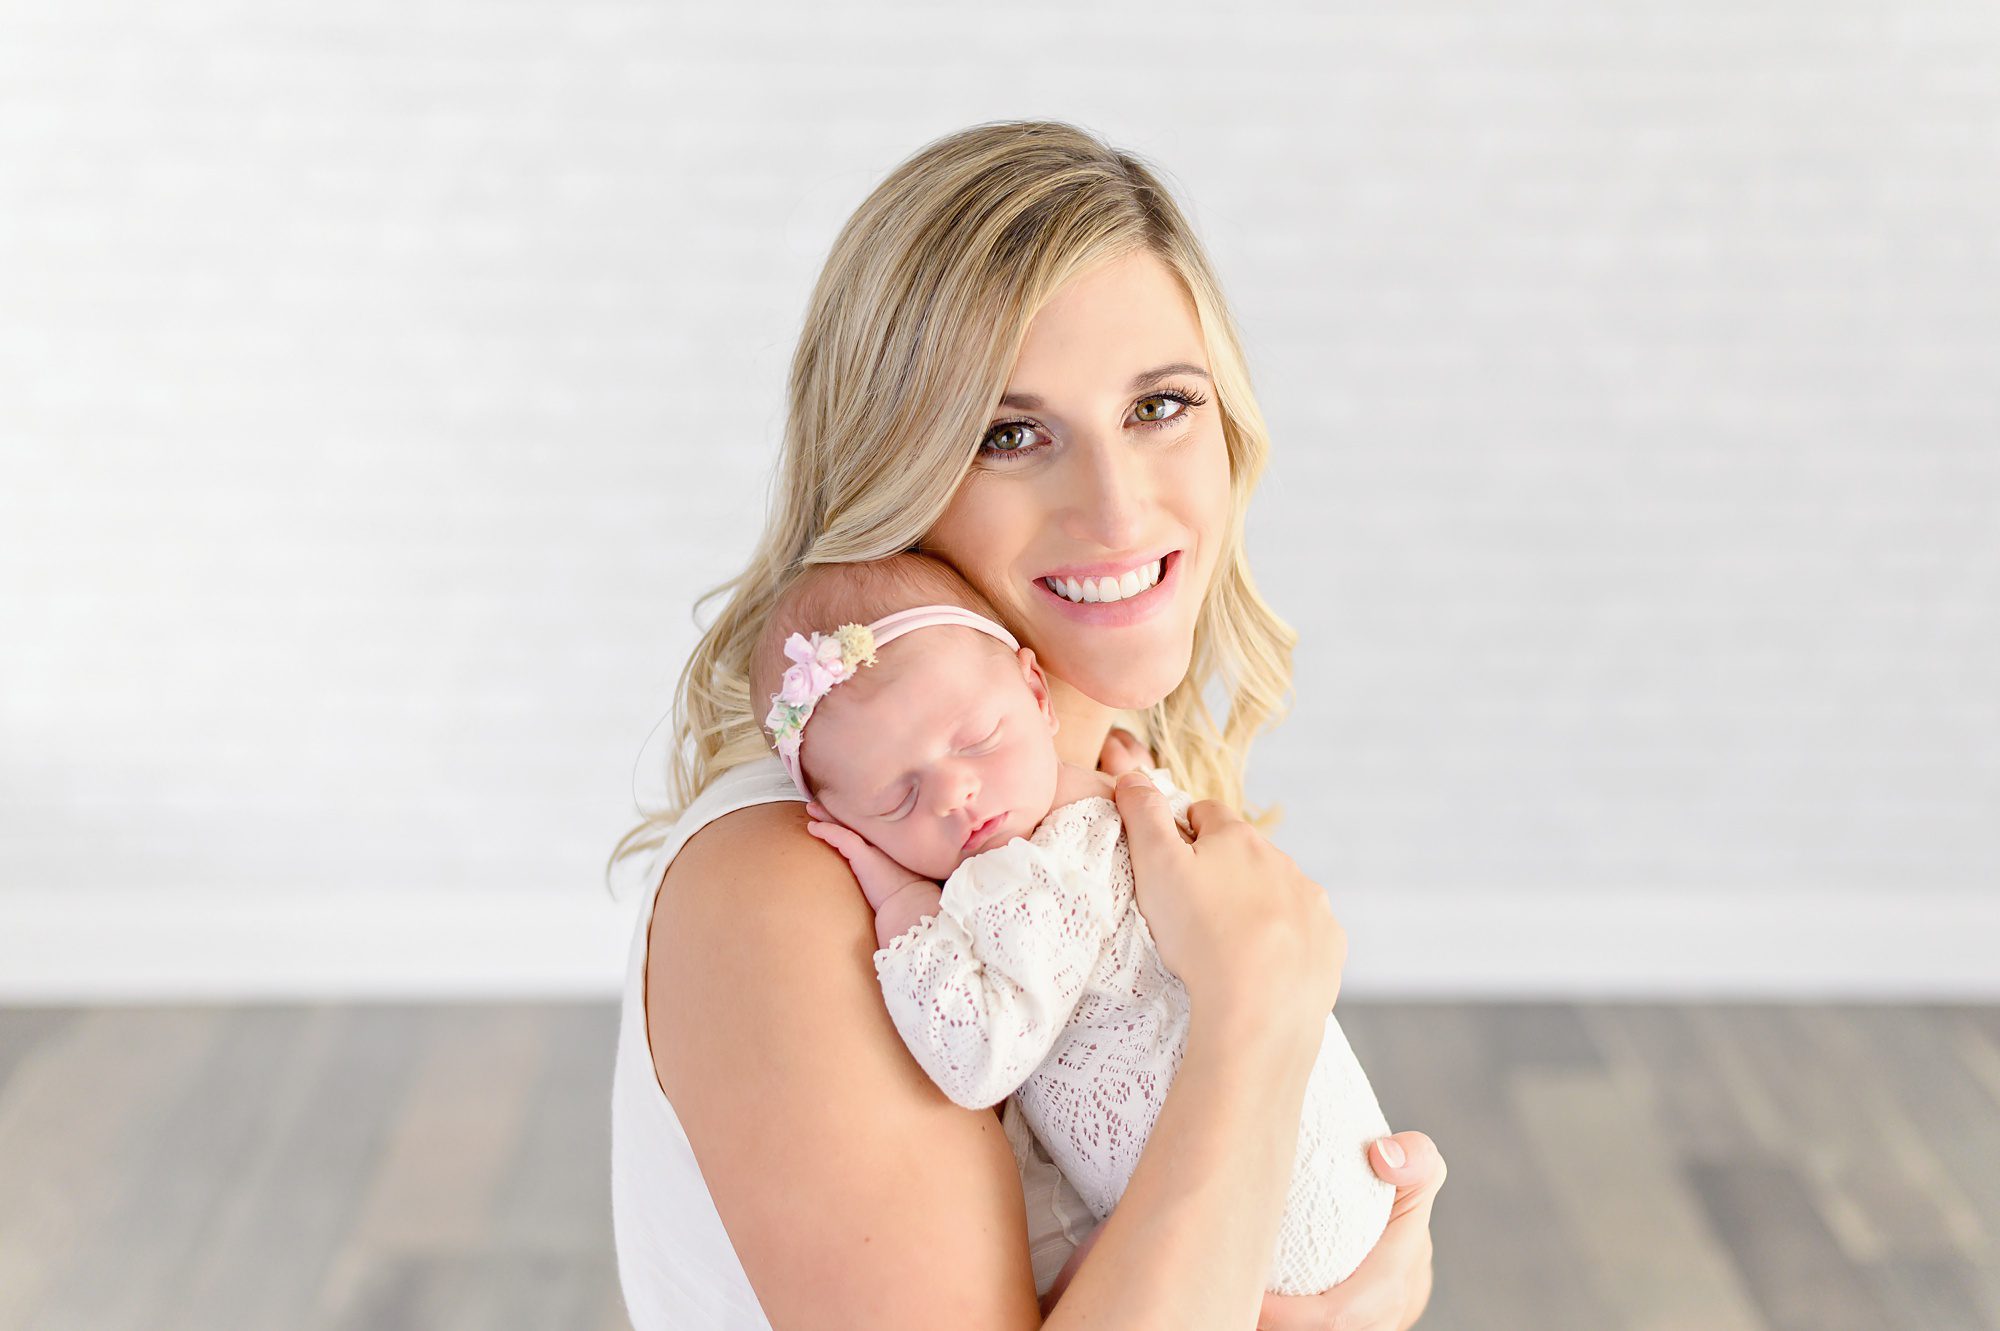 A young family of 4 with a new baby girl gets newborn portraits done in a bright white studio in Tampa Florida.